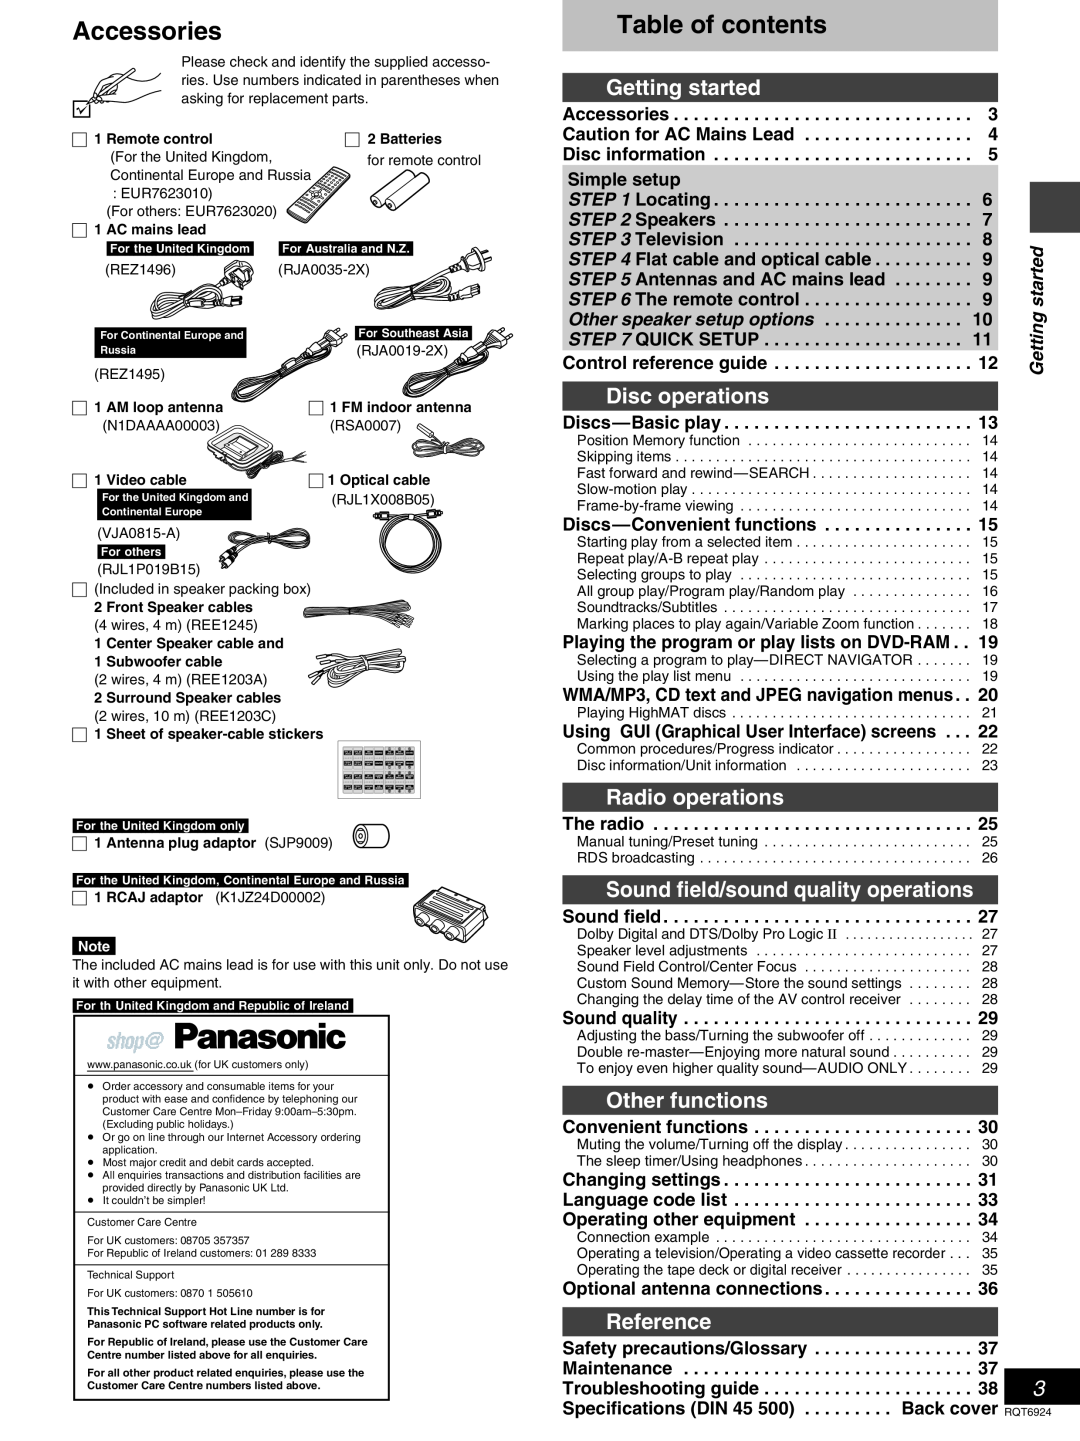 Panasonic SC-DT310 Accessories, Table of contents, Getting started, Disc operations, Radio operations, Other functions 